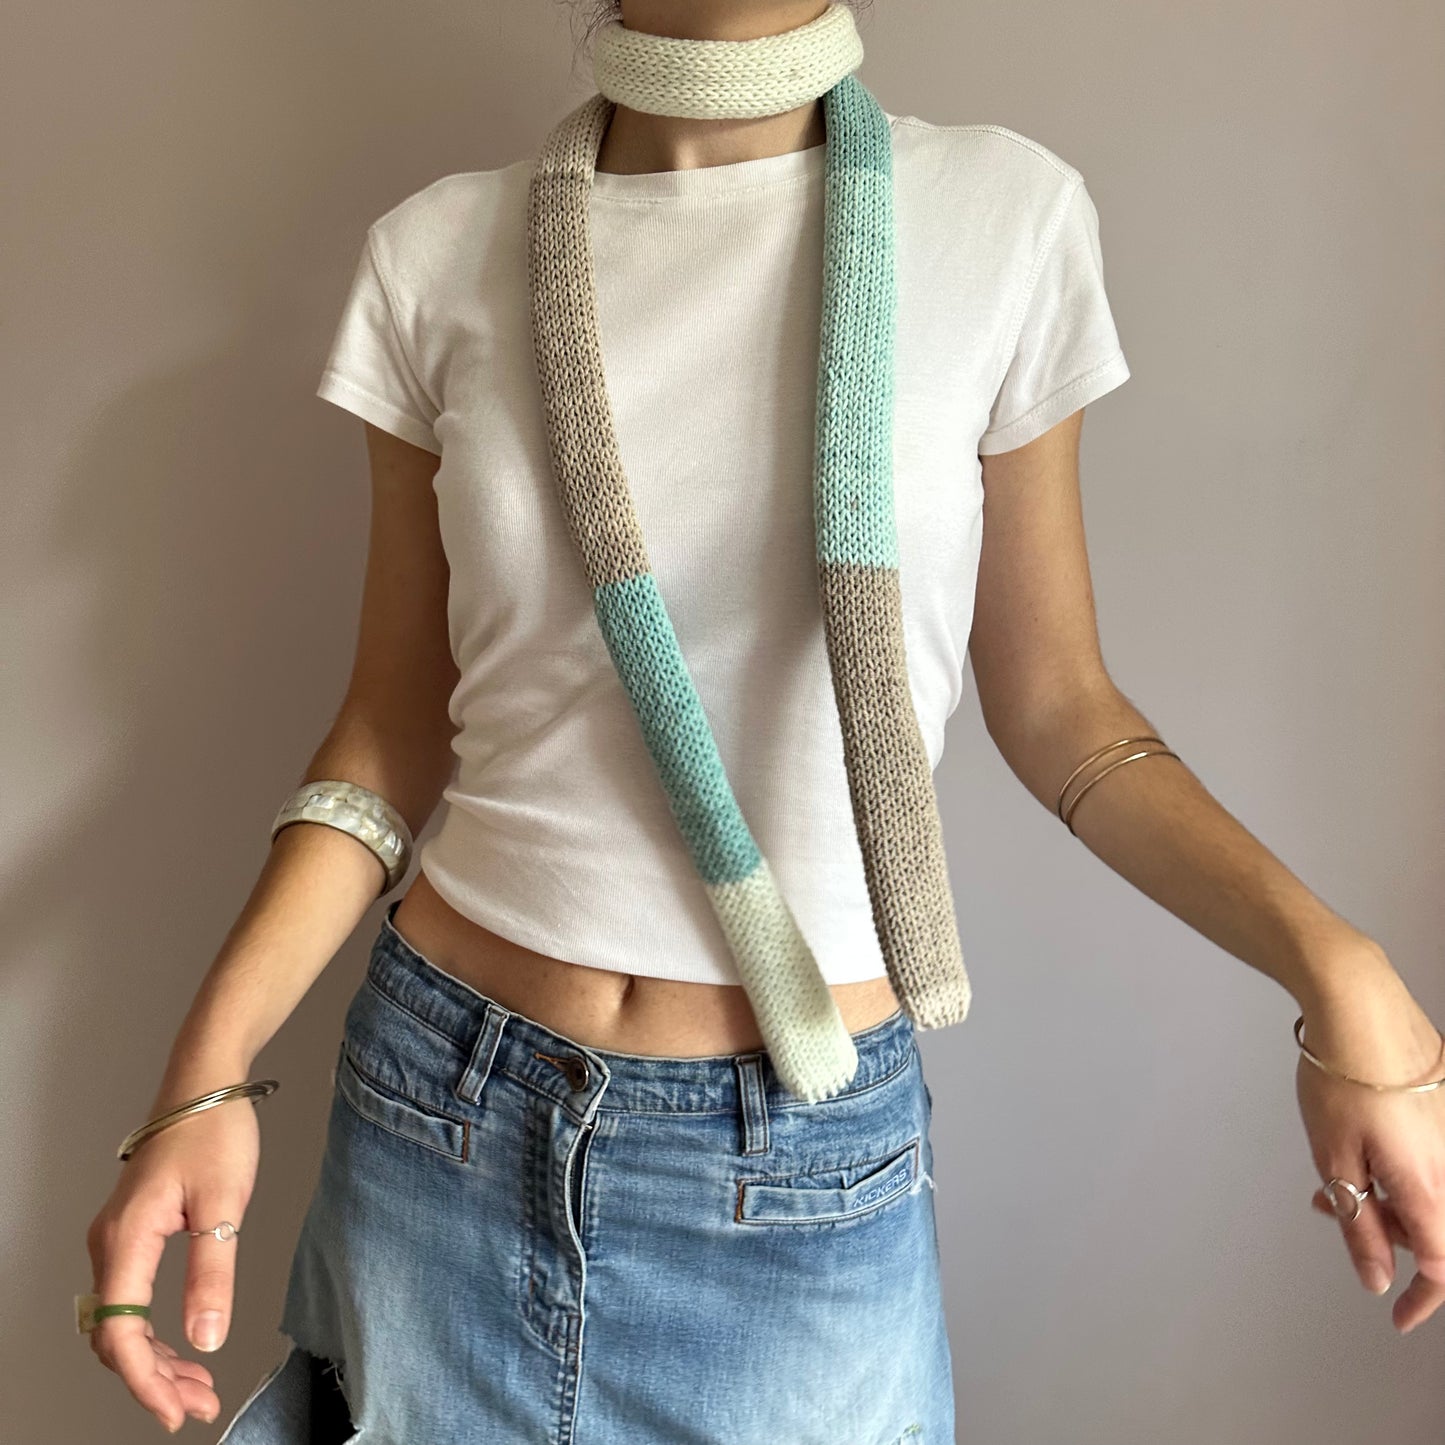 Handmade knitted colour block skinny scarf in baby blue, cream and beige